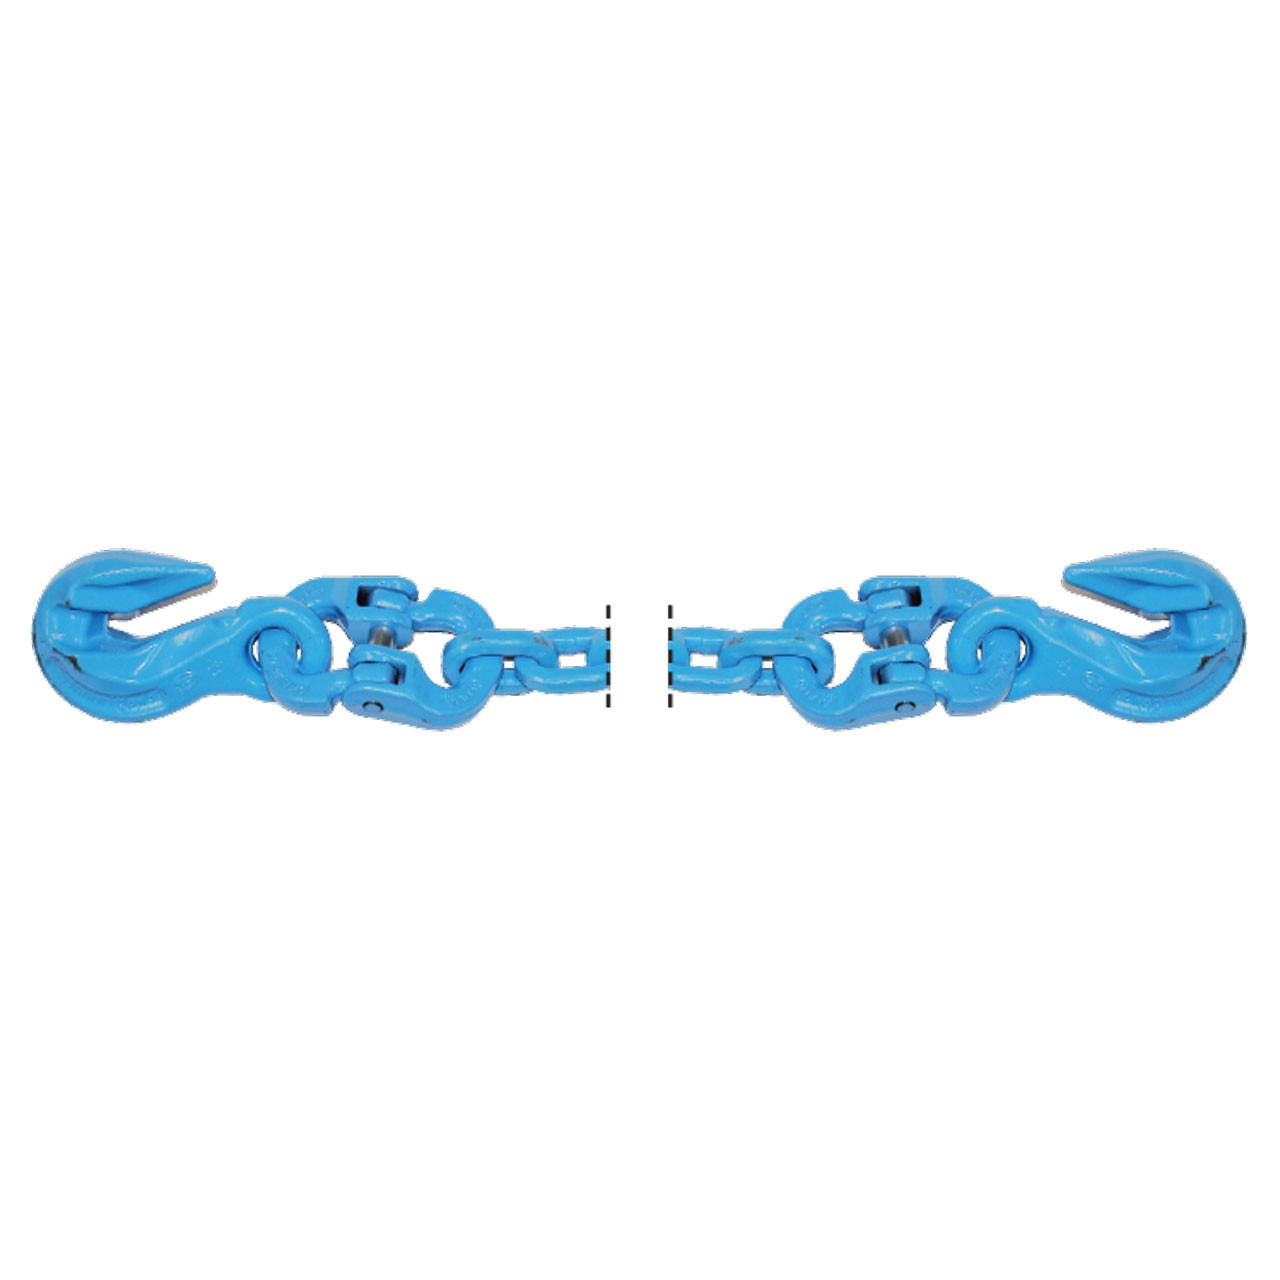 B/A Products Co. 3/8 Grade 120 Cradle Grab Hook Chain